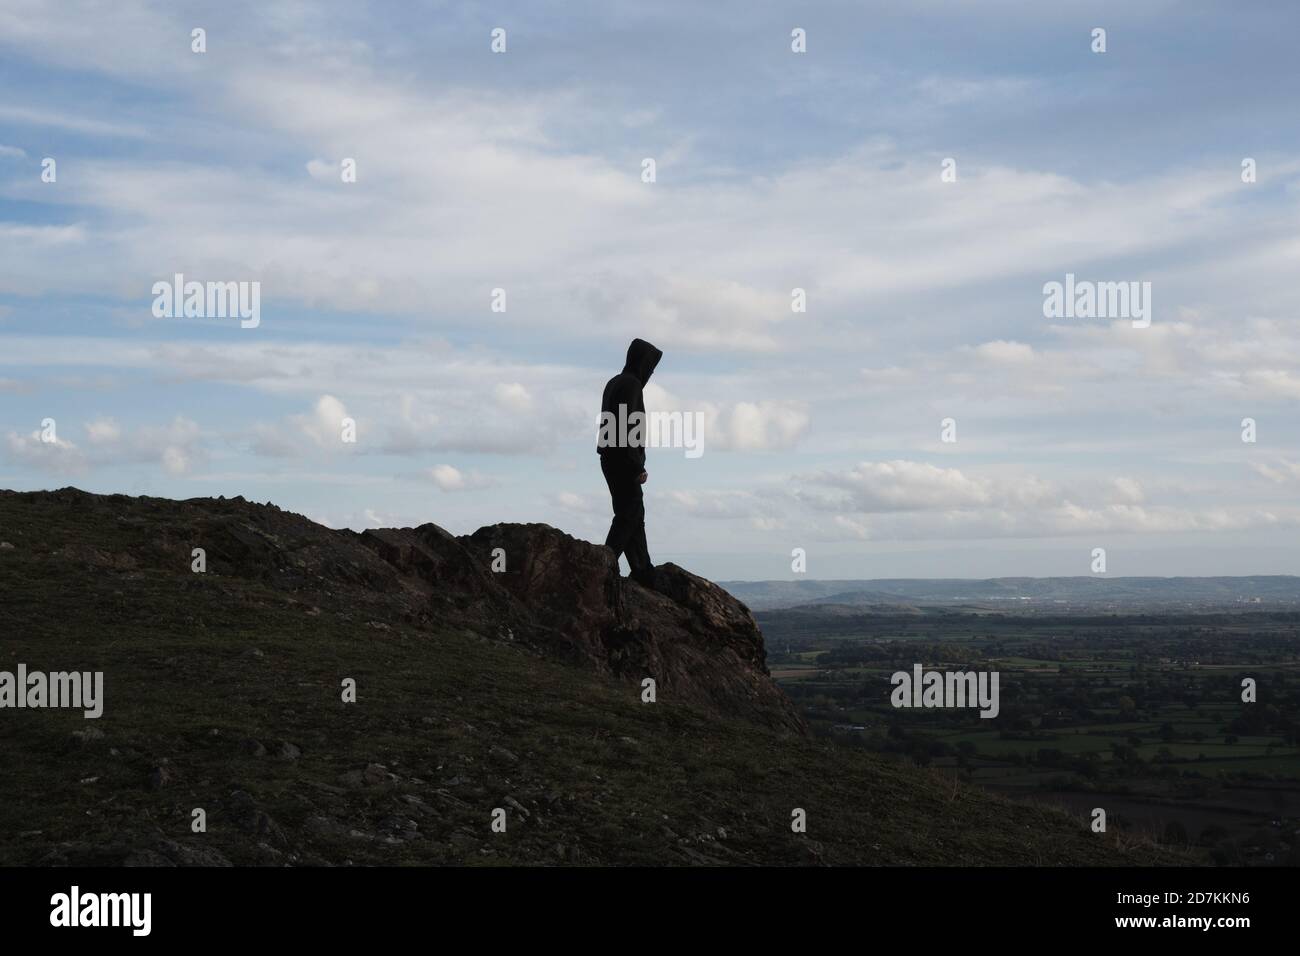 A hooded figure walking towards the top of a rocky outcrop. Looking down across the landscape Stock Photo